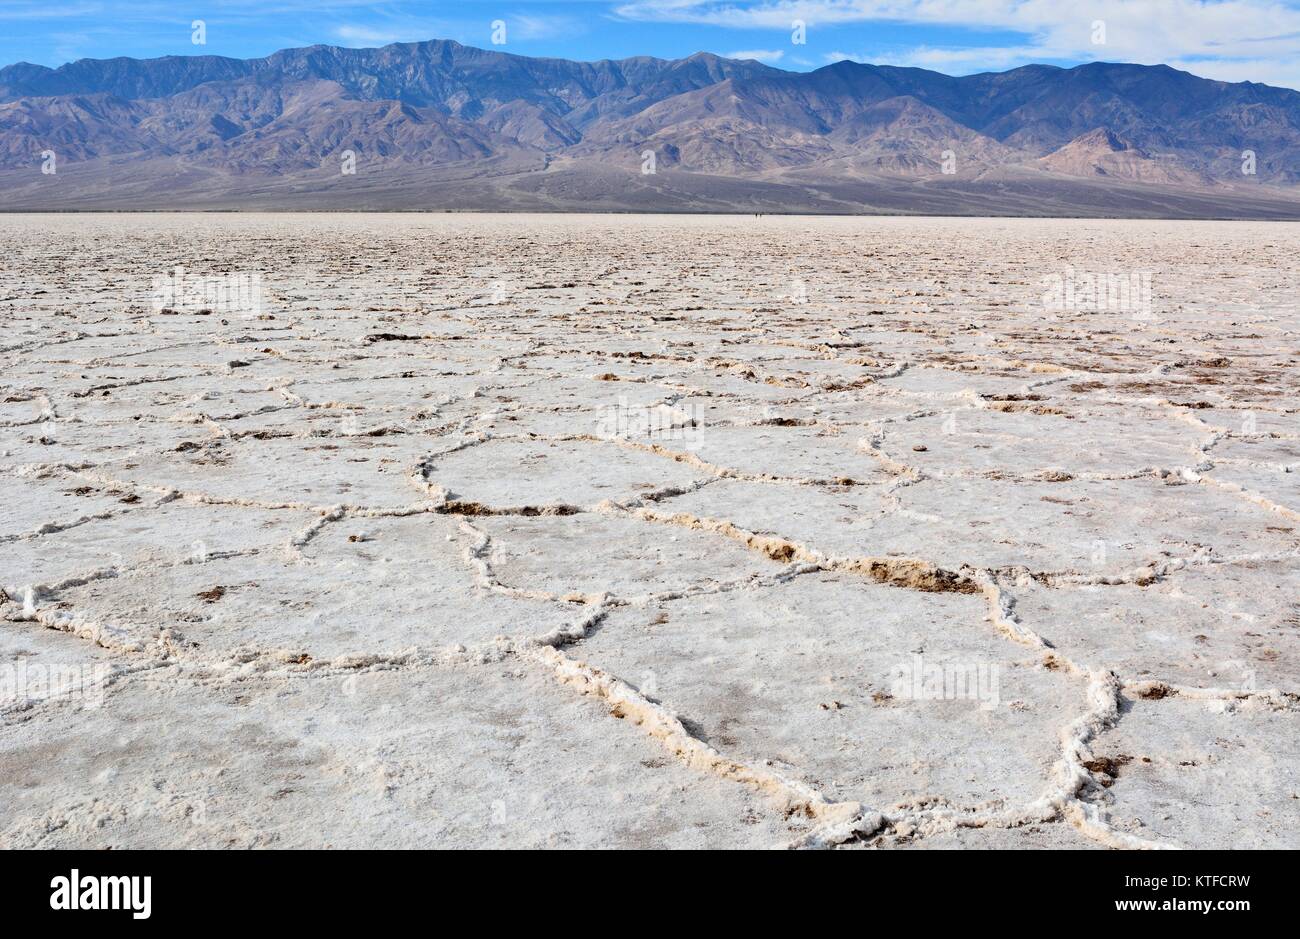 Crinkly salt flats of constantly evaporating bed of salty, mineralized water at the Badwater Basin in the Death Valley National Park in USA. Stock Photo